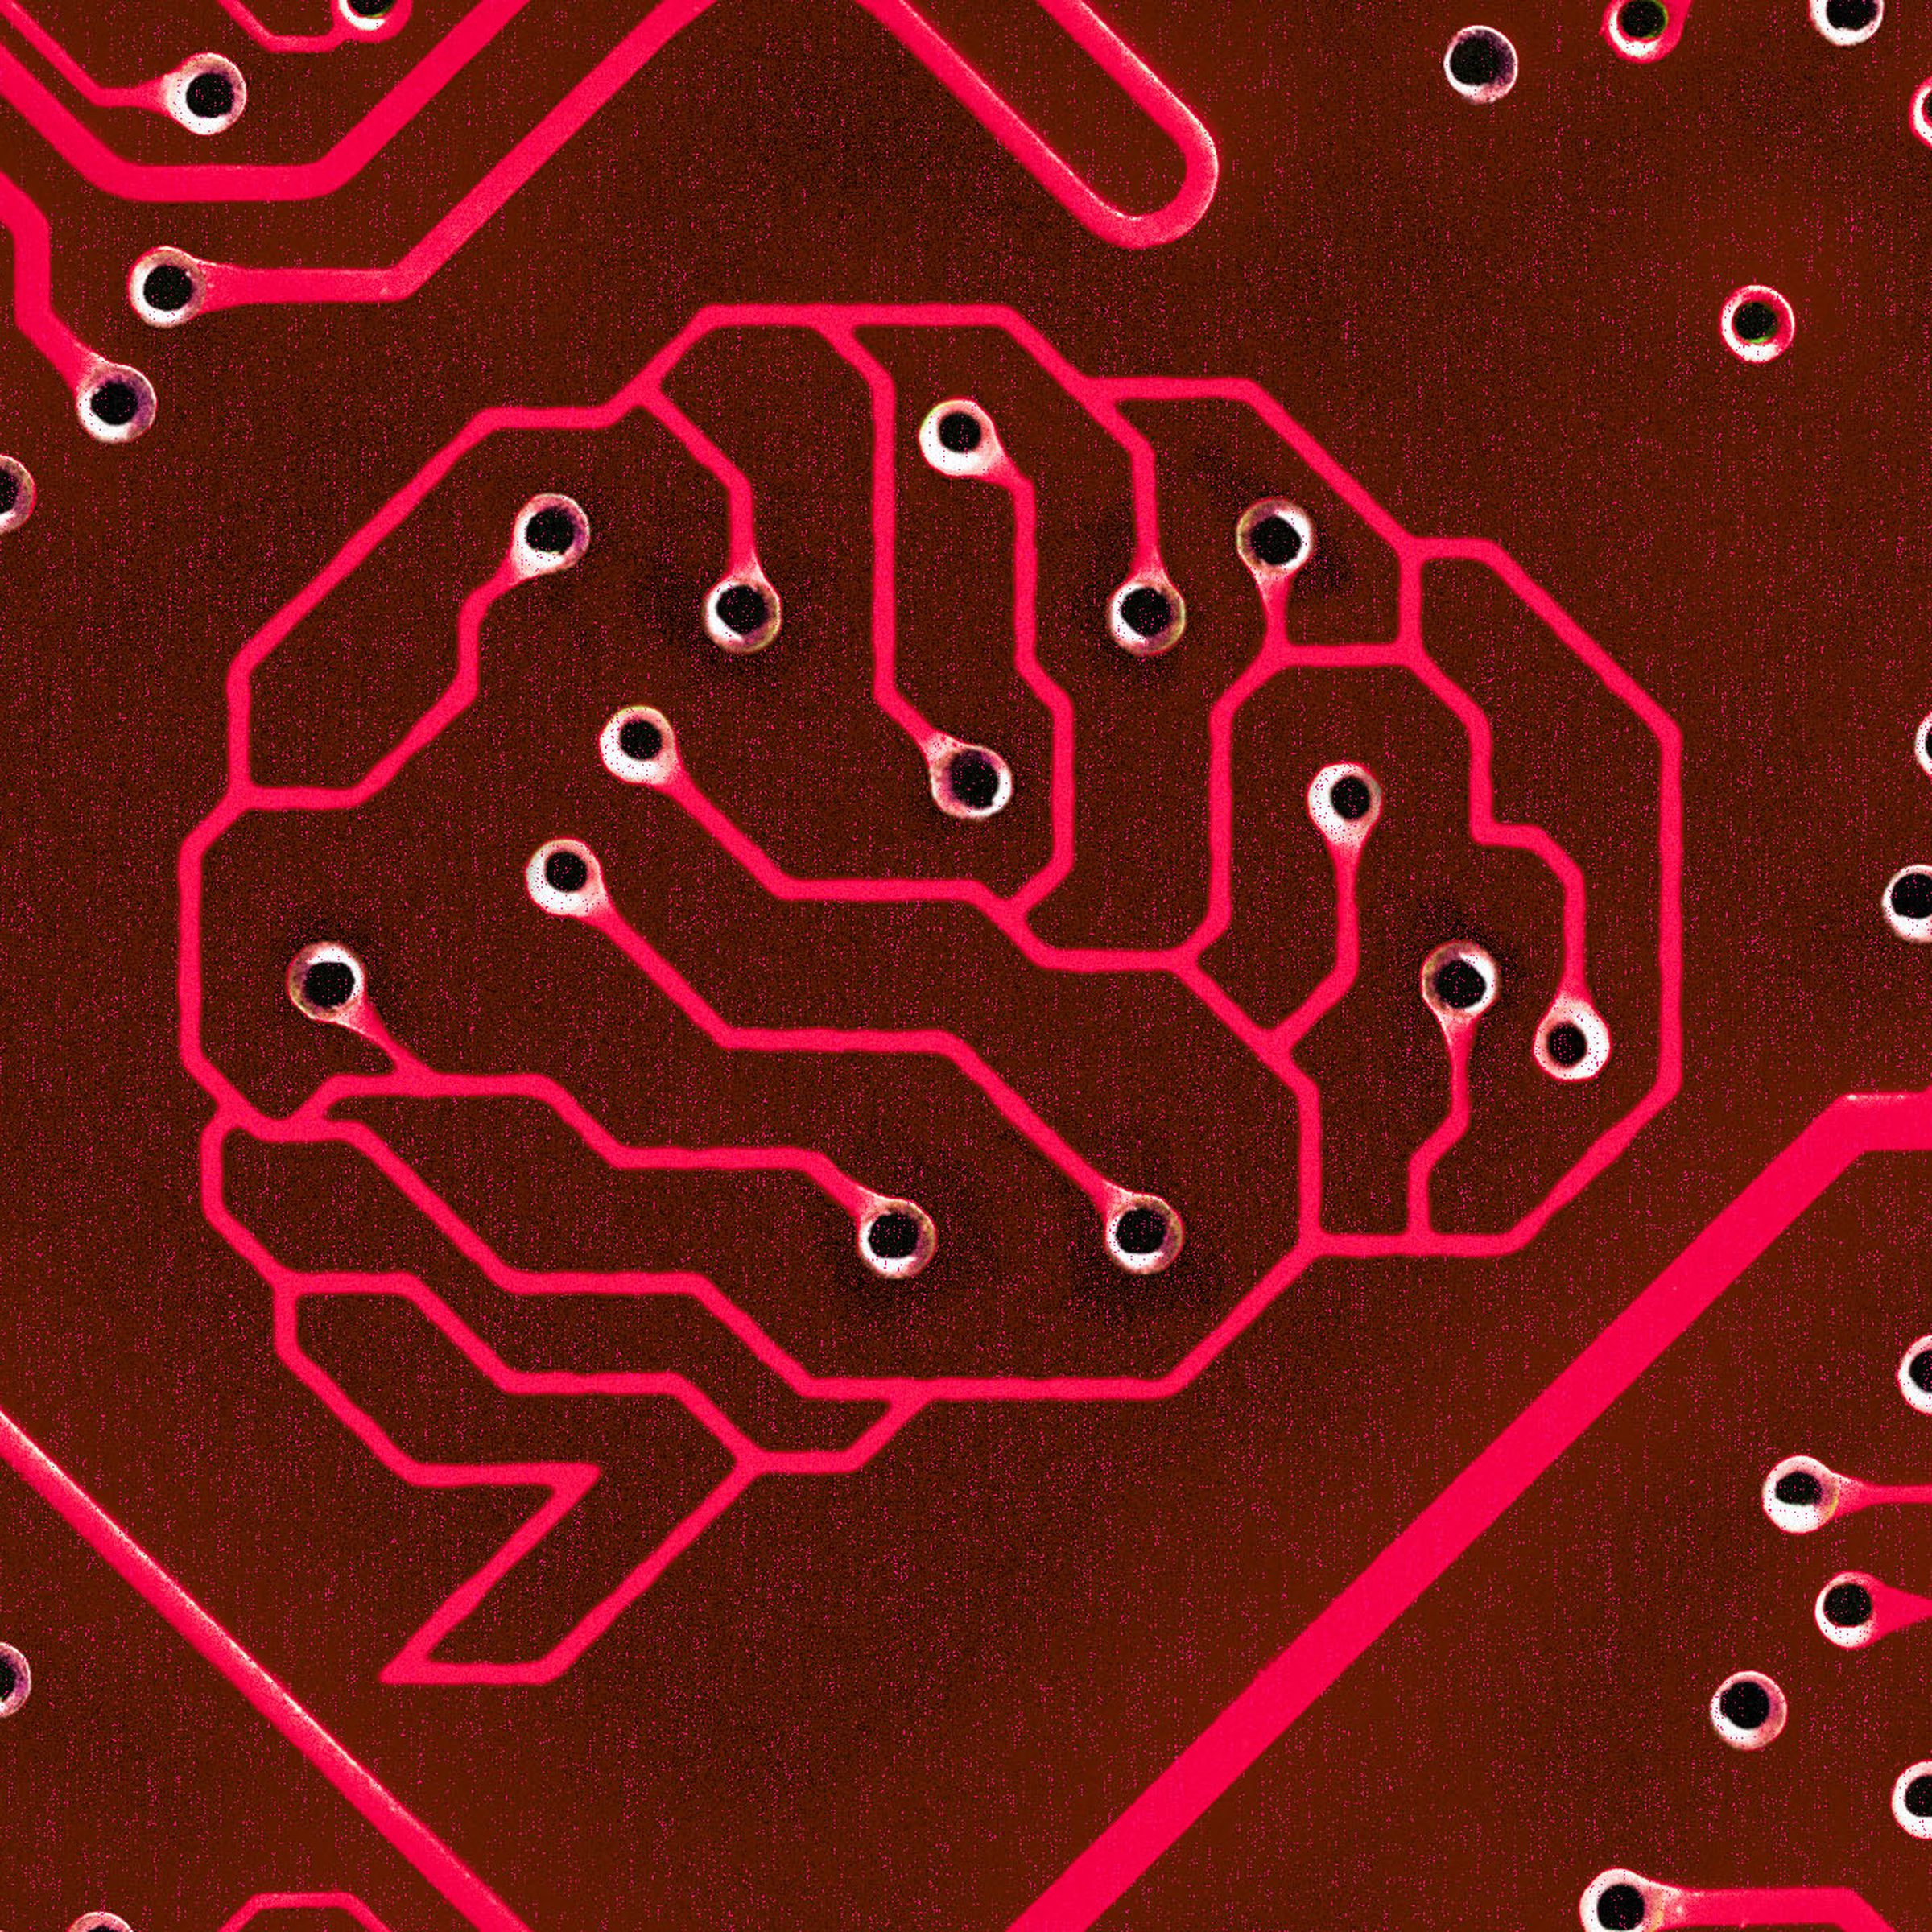 Photo illustration of a brain on a circuit board in red.